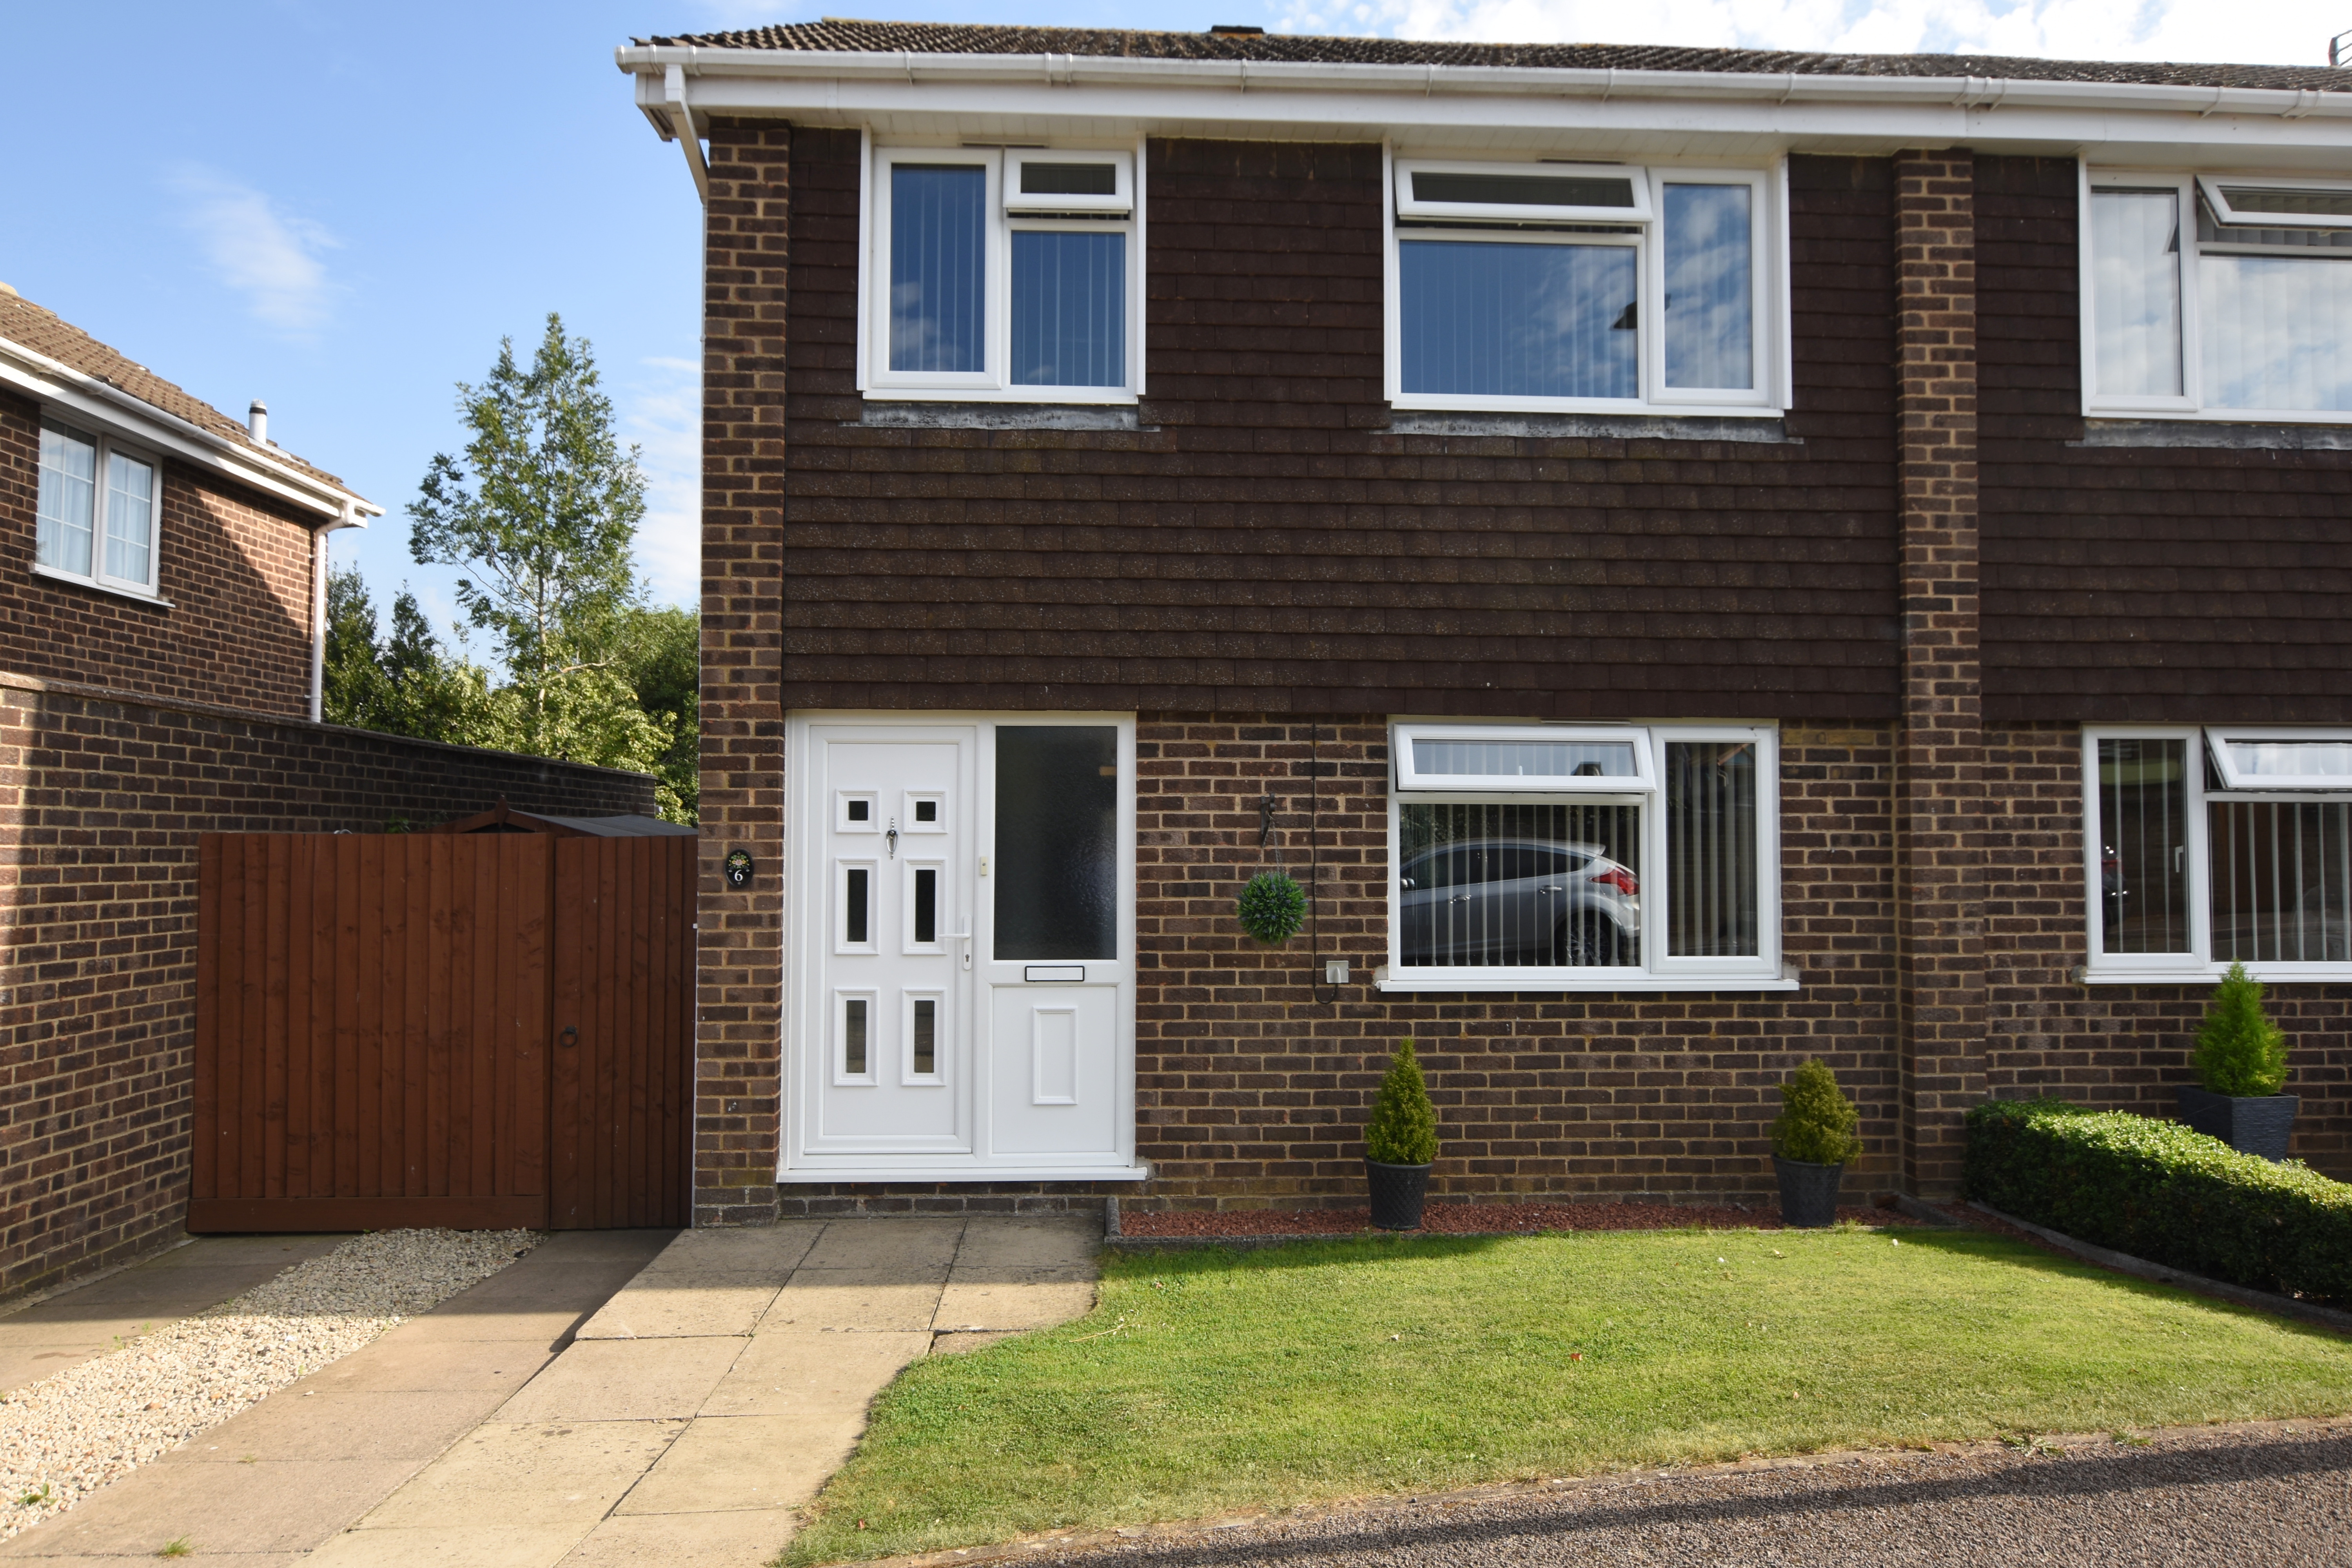 3 bed  for sale in Dunlin Court, Banbury  - Property Image 1